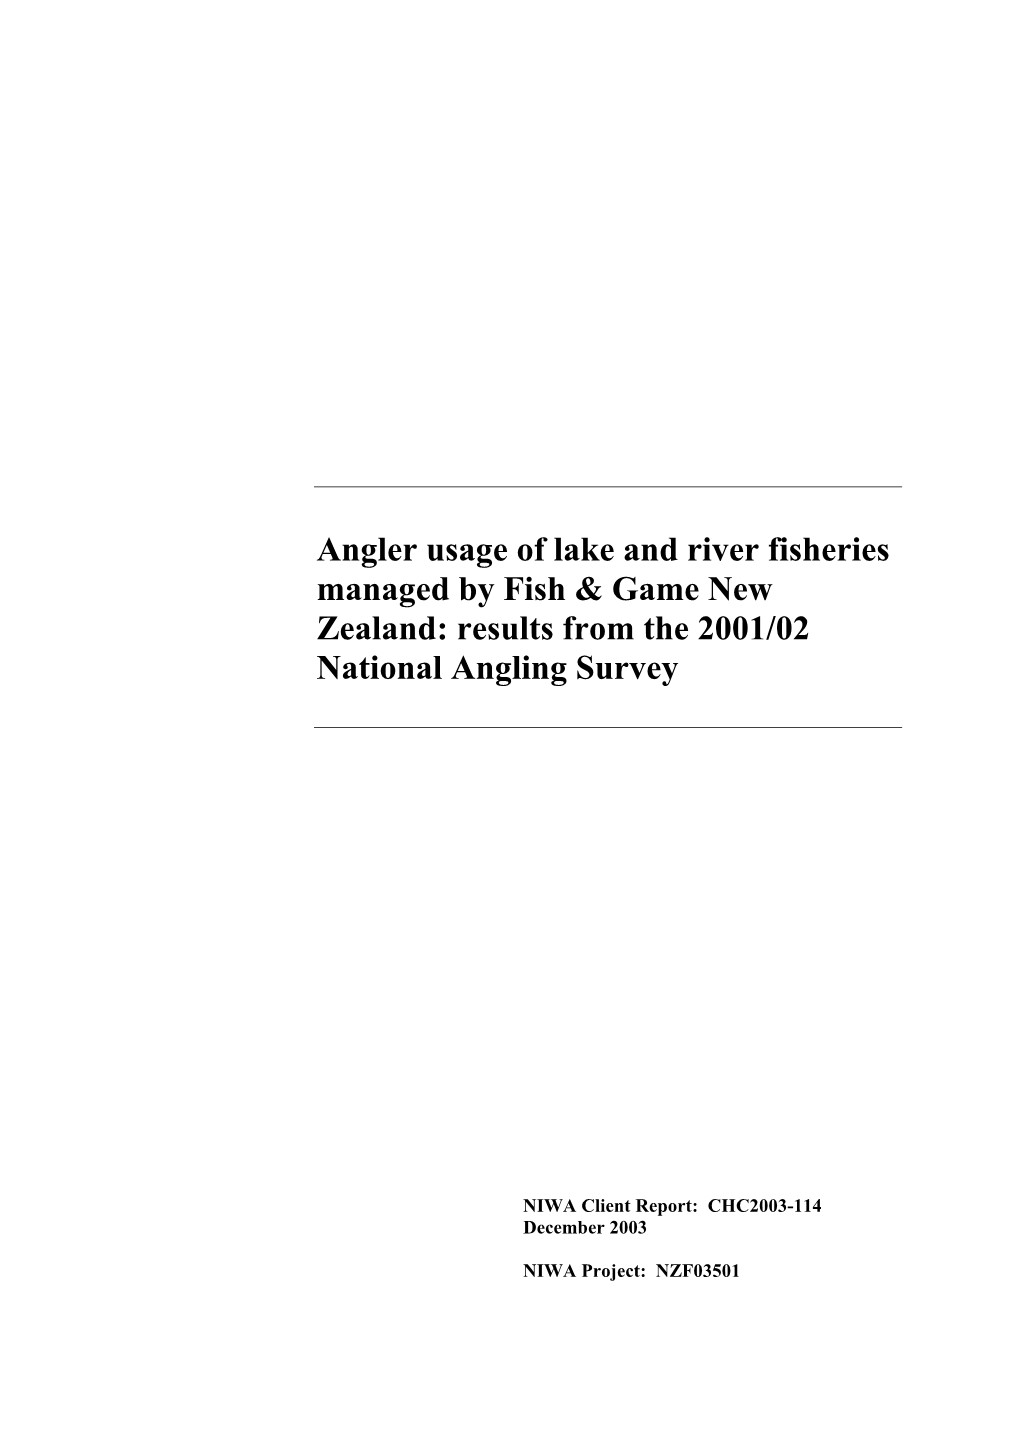 Angler Usage of Lake and River Fisheries Managed by Fish & Game